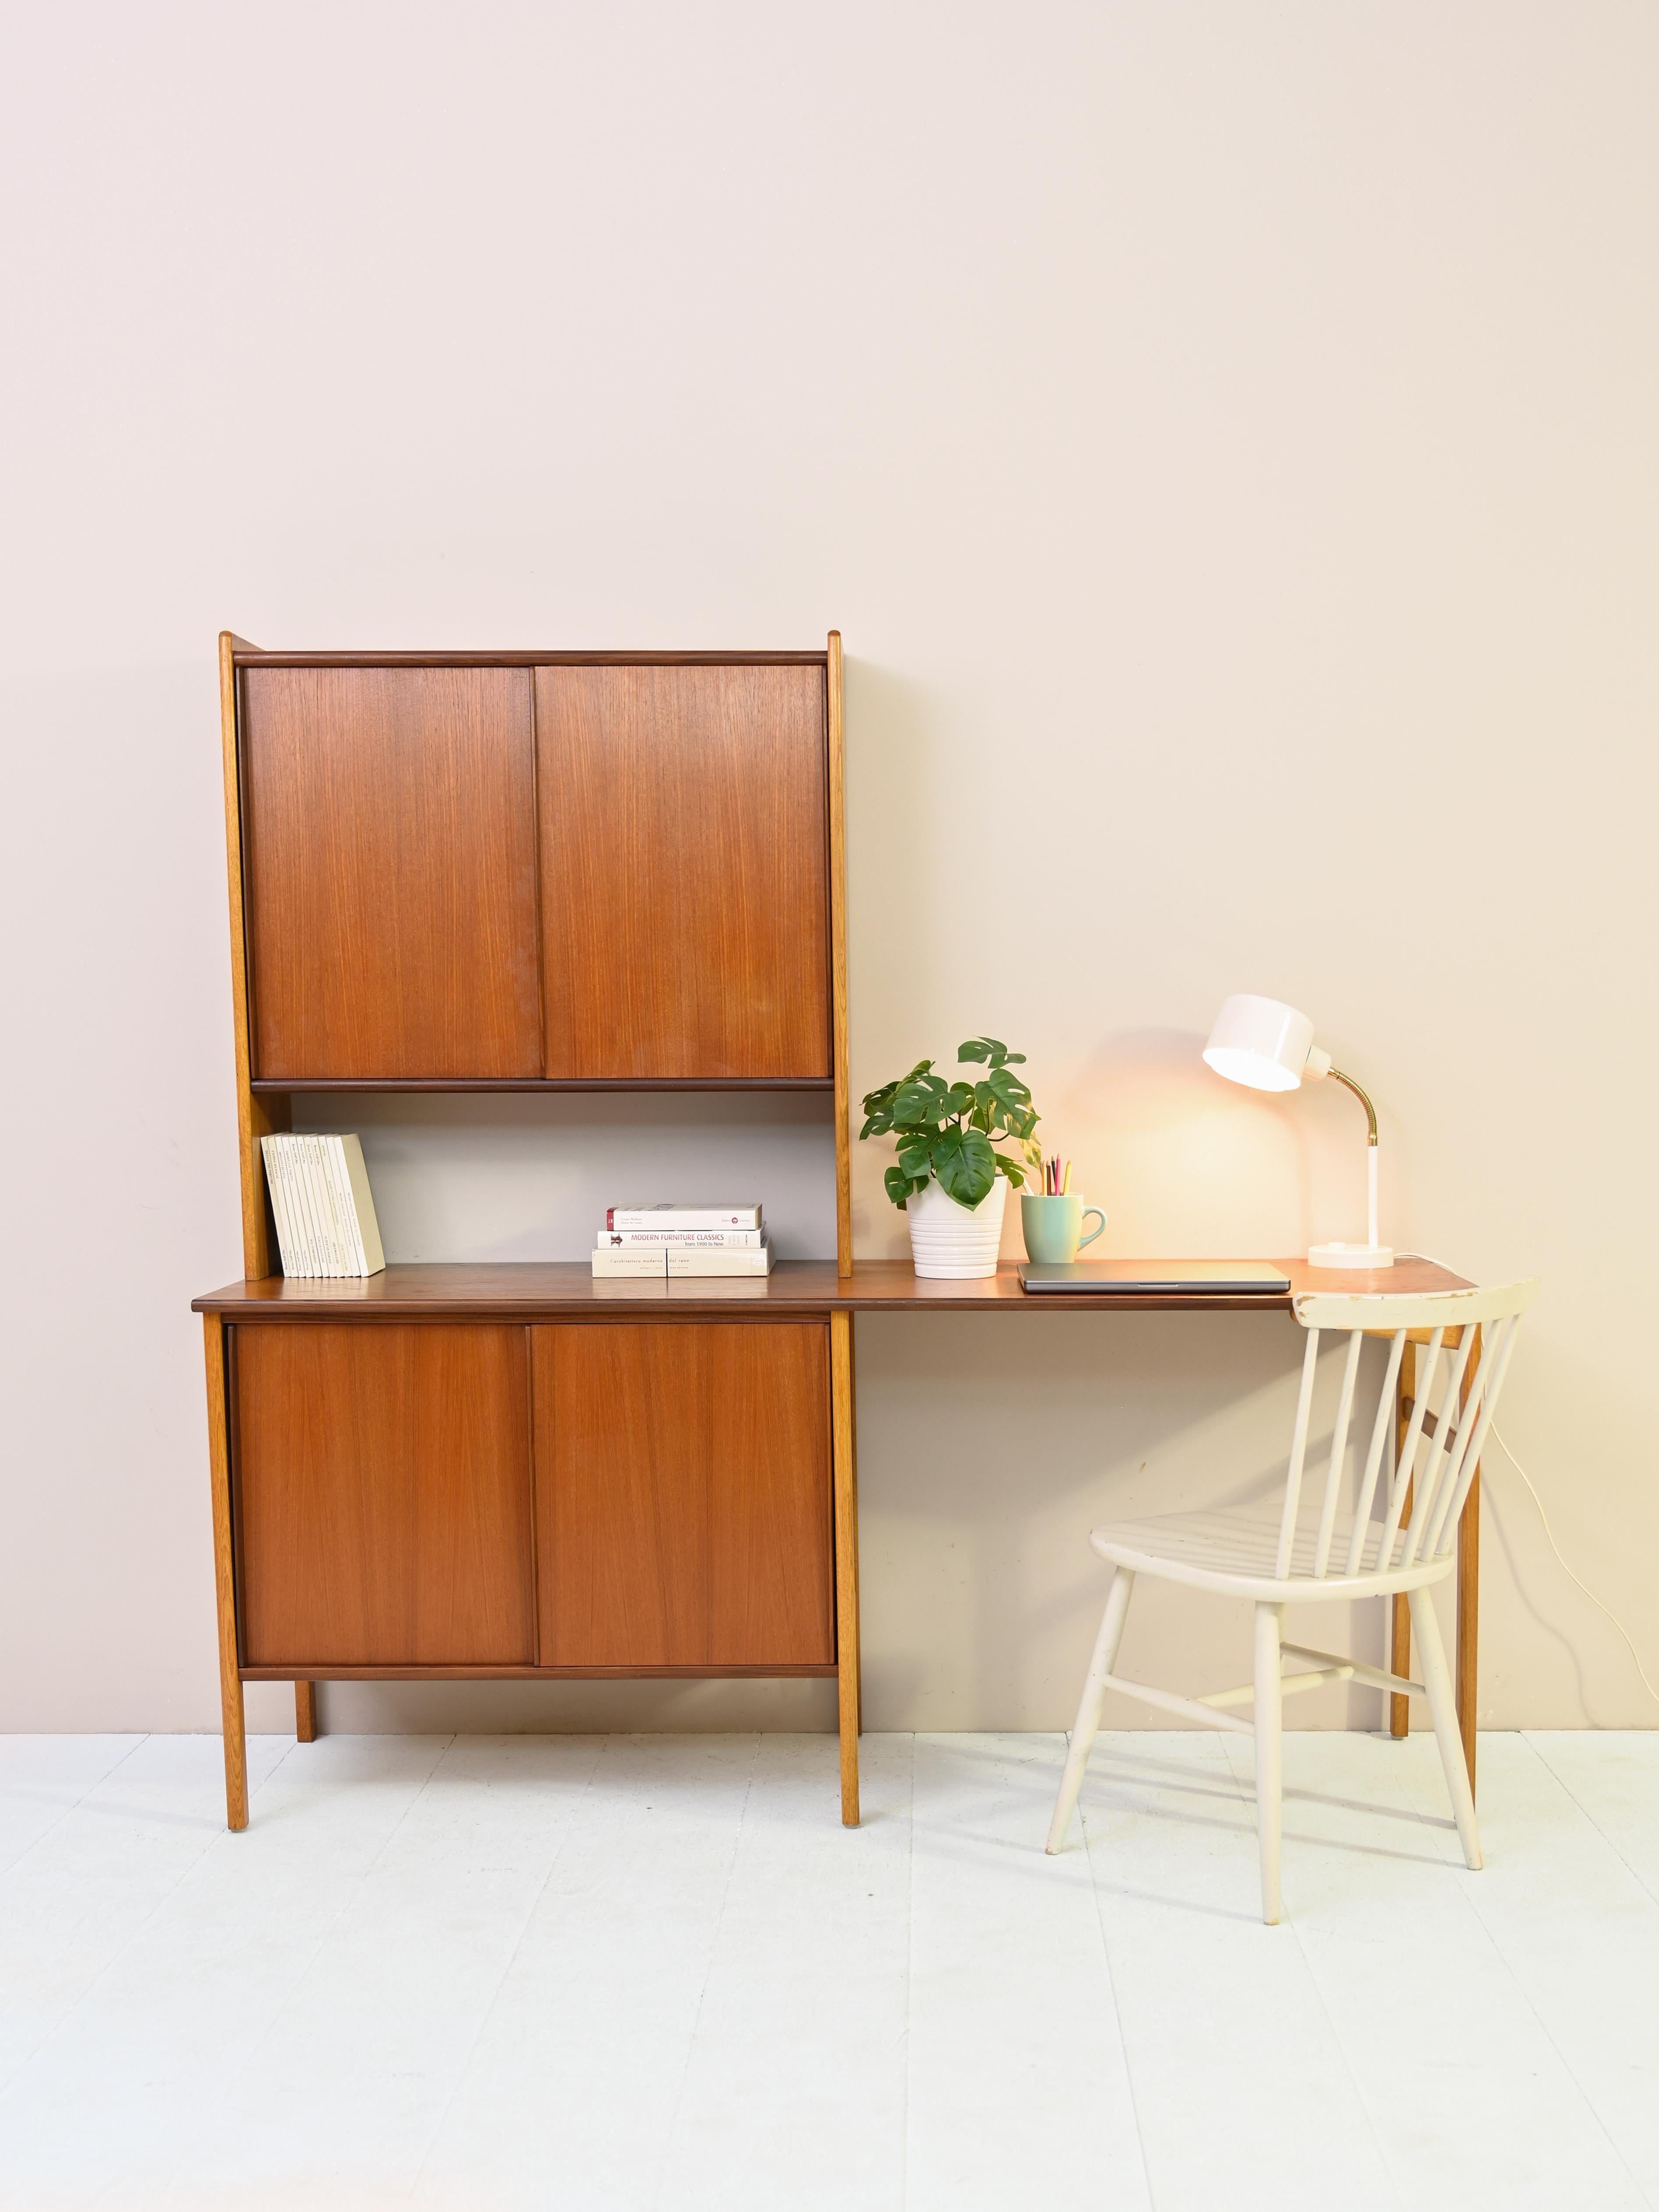 Particular mid-century teak desk with storage compartment and bookcase.

The regular structure features a storage compartment with sliding doors on one side and two slender, tapered legs on the other. 
A large bookcase rests on the desk